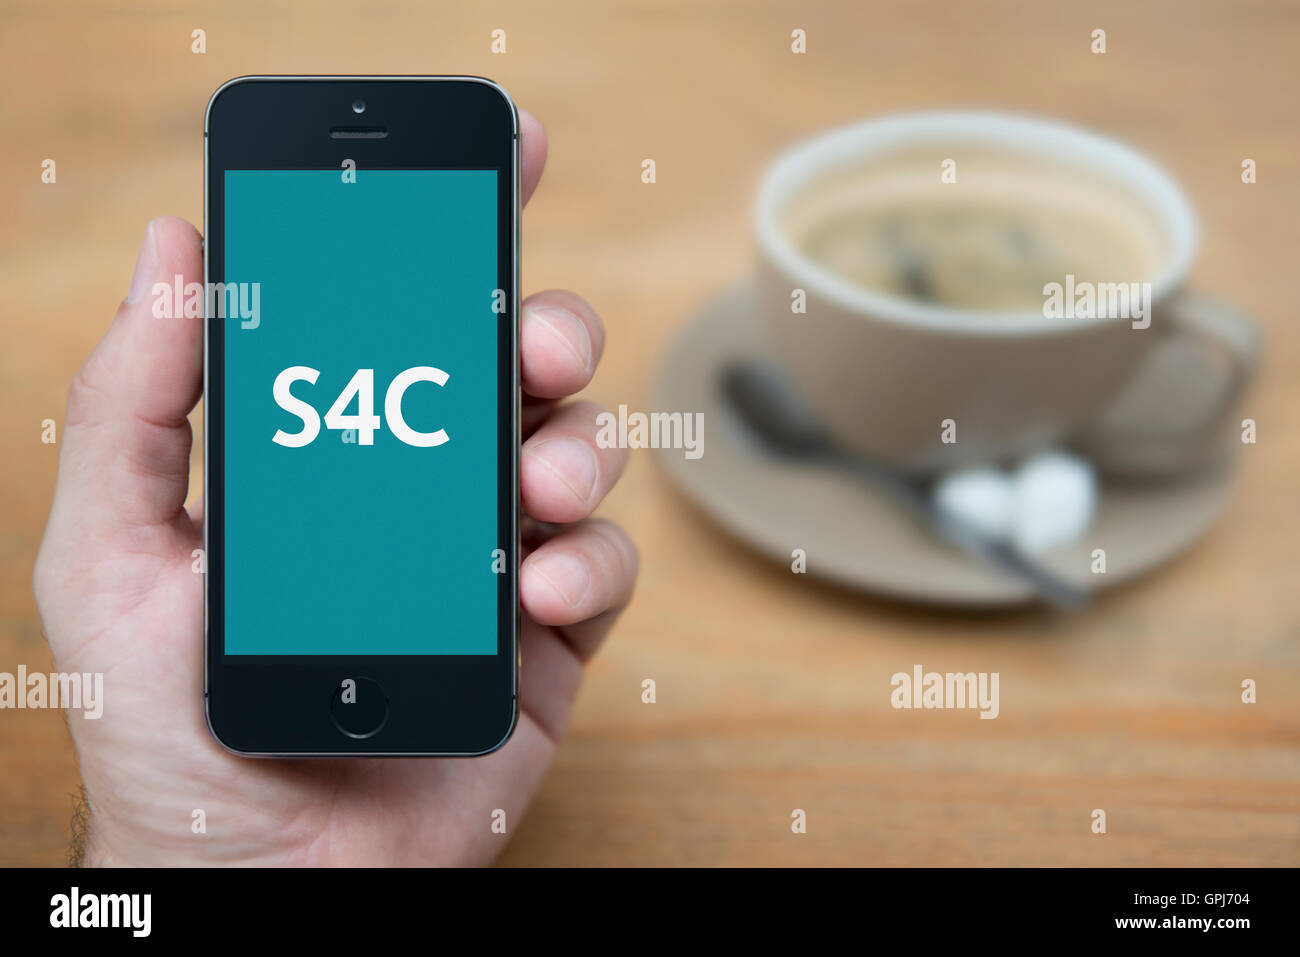 A man looks at his iPhone which displays the S4C Welsh television station logo, with coffee (Editorial use only). Stock Photo